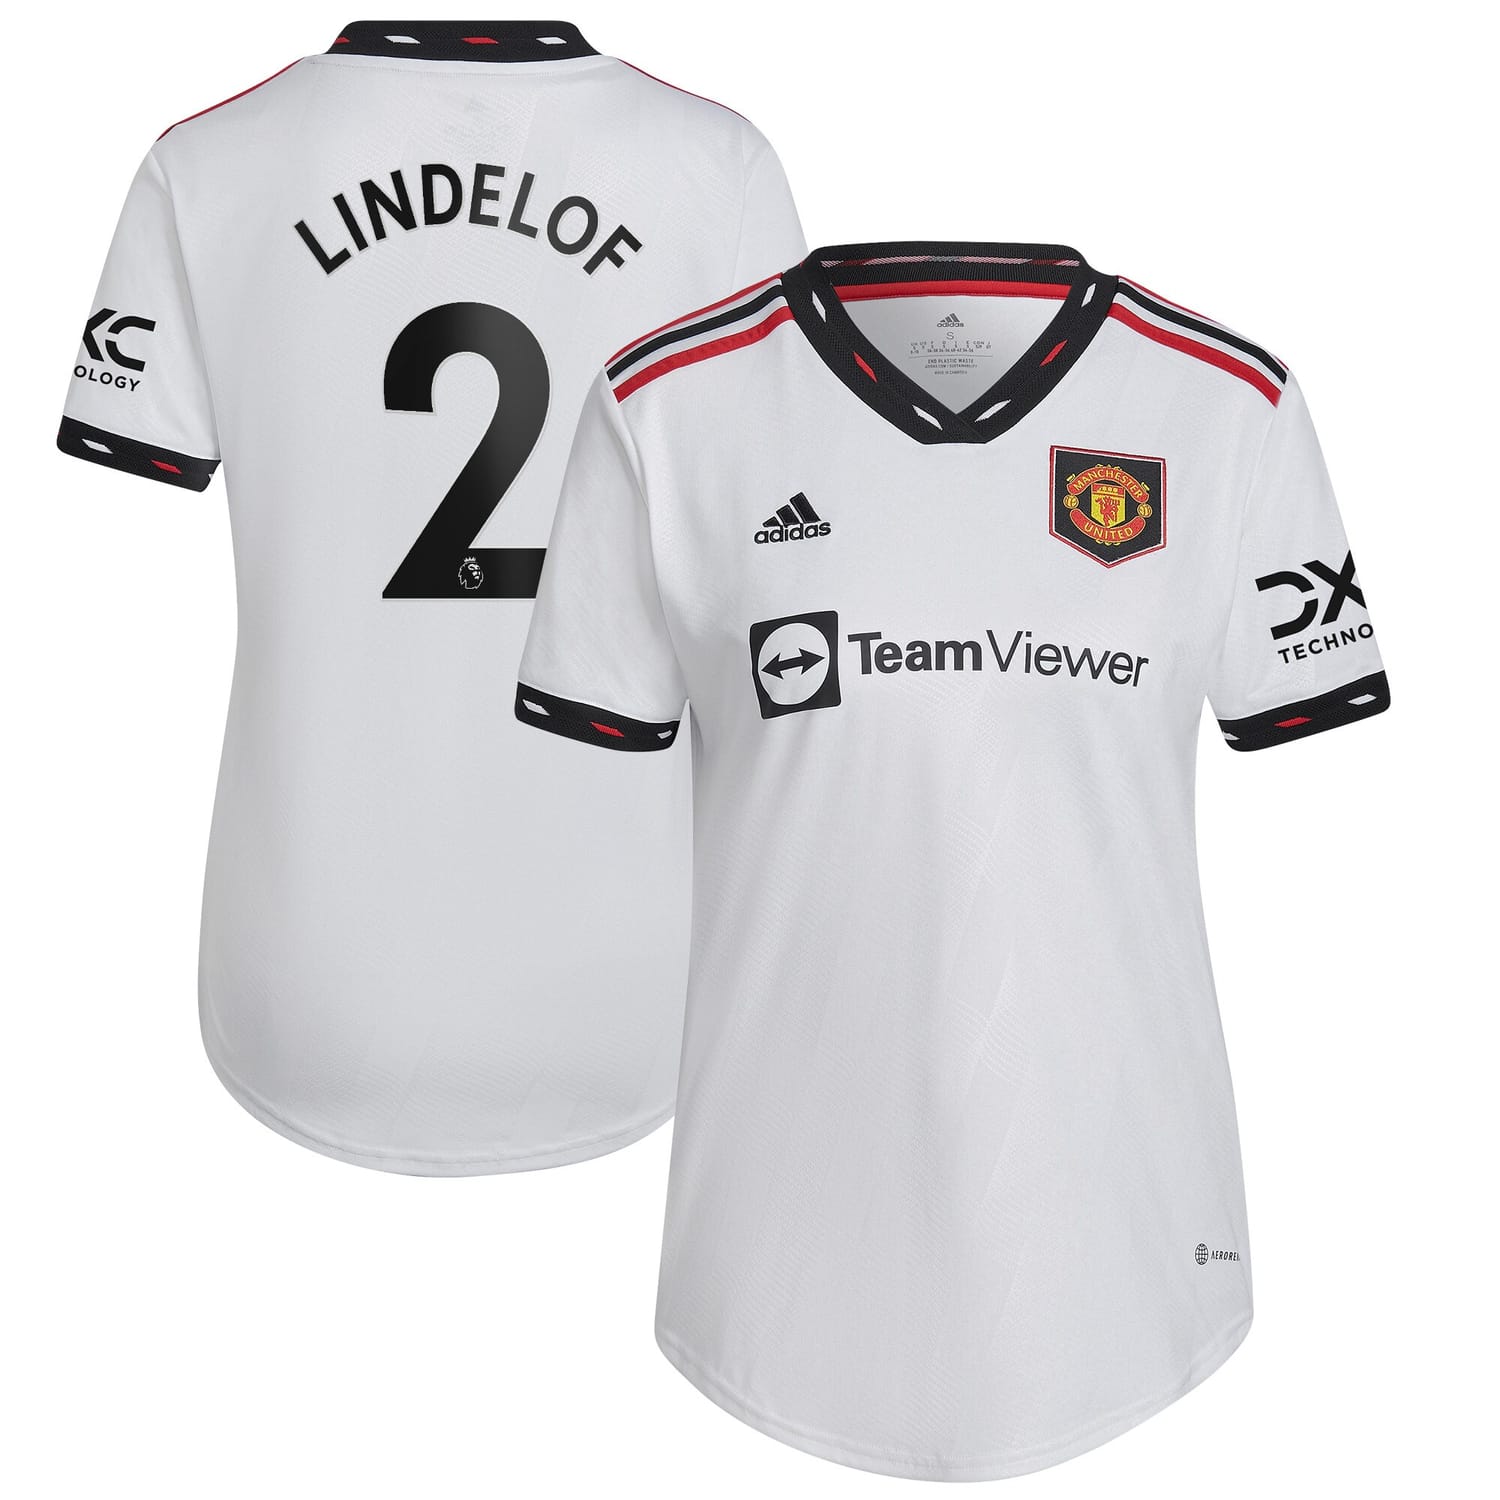 Premier League Manchester United Away Jersey Shirt White 2022-23 player Victor Lindelöf printing for Women